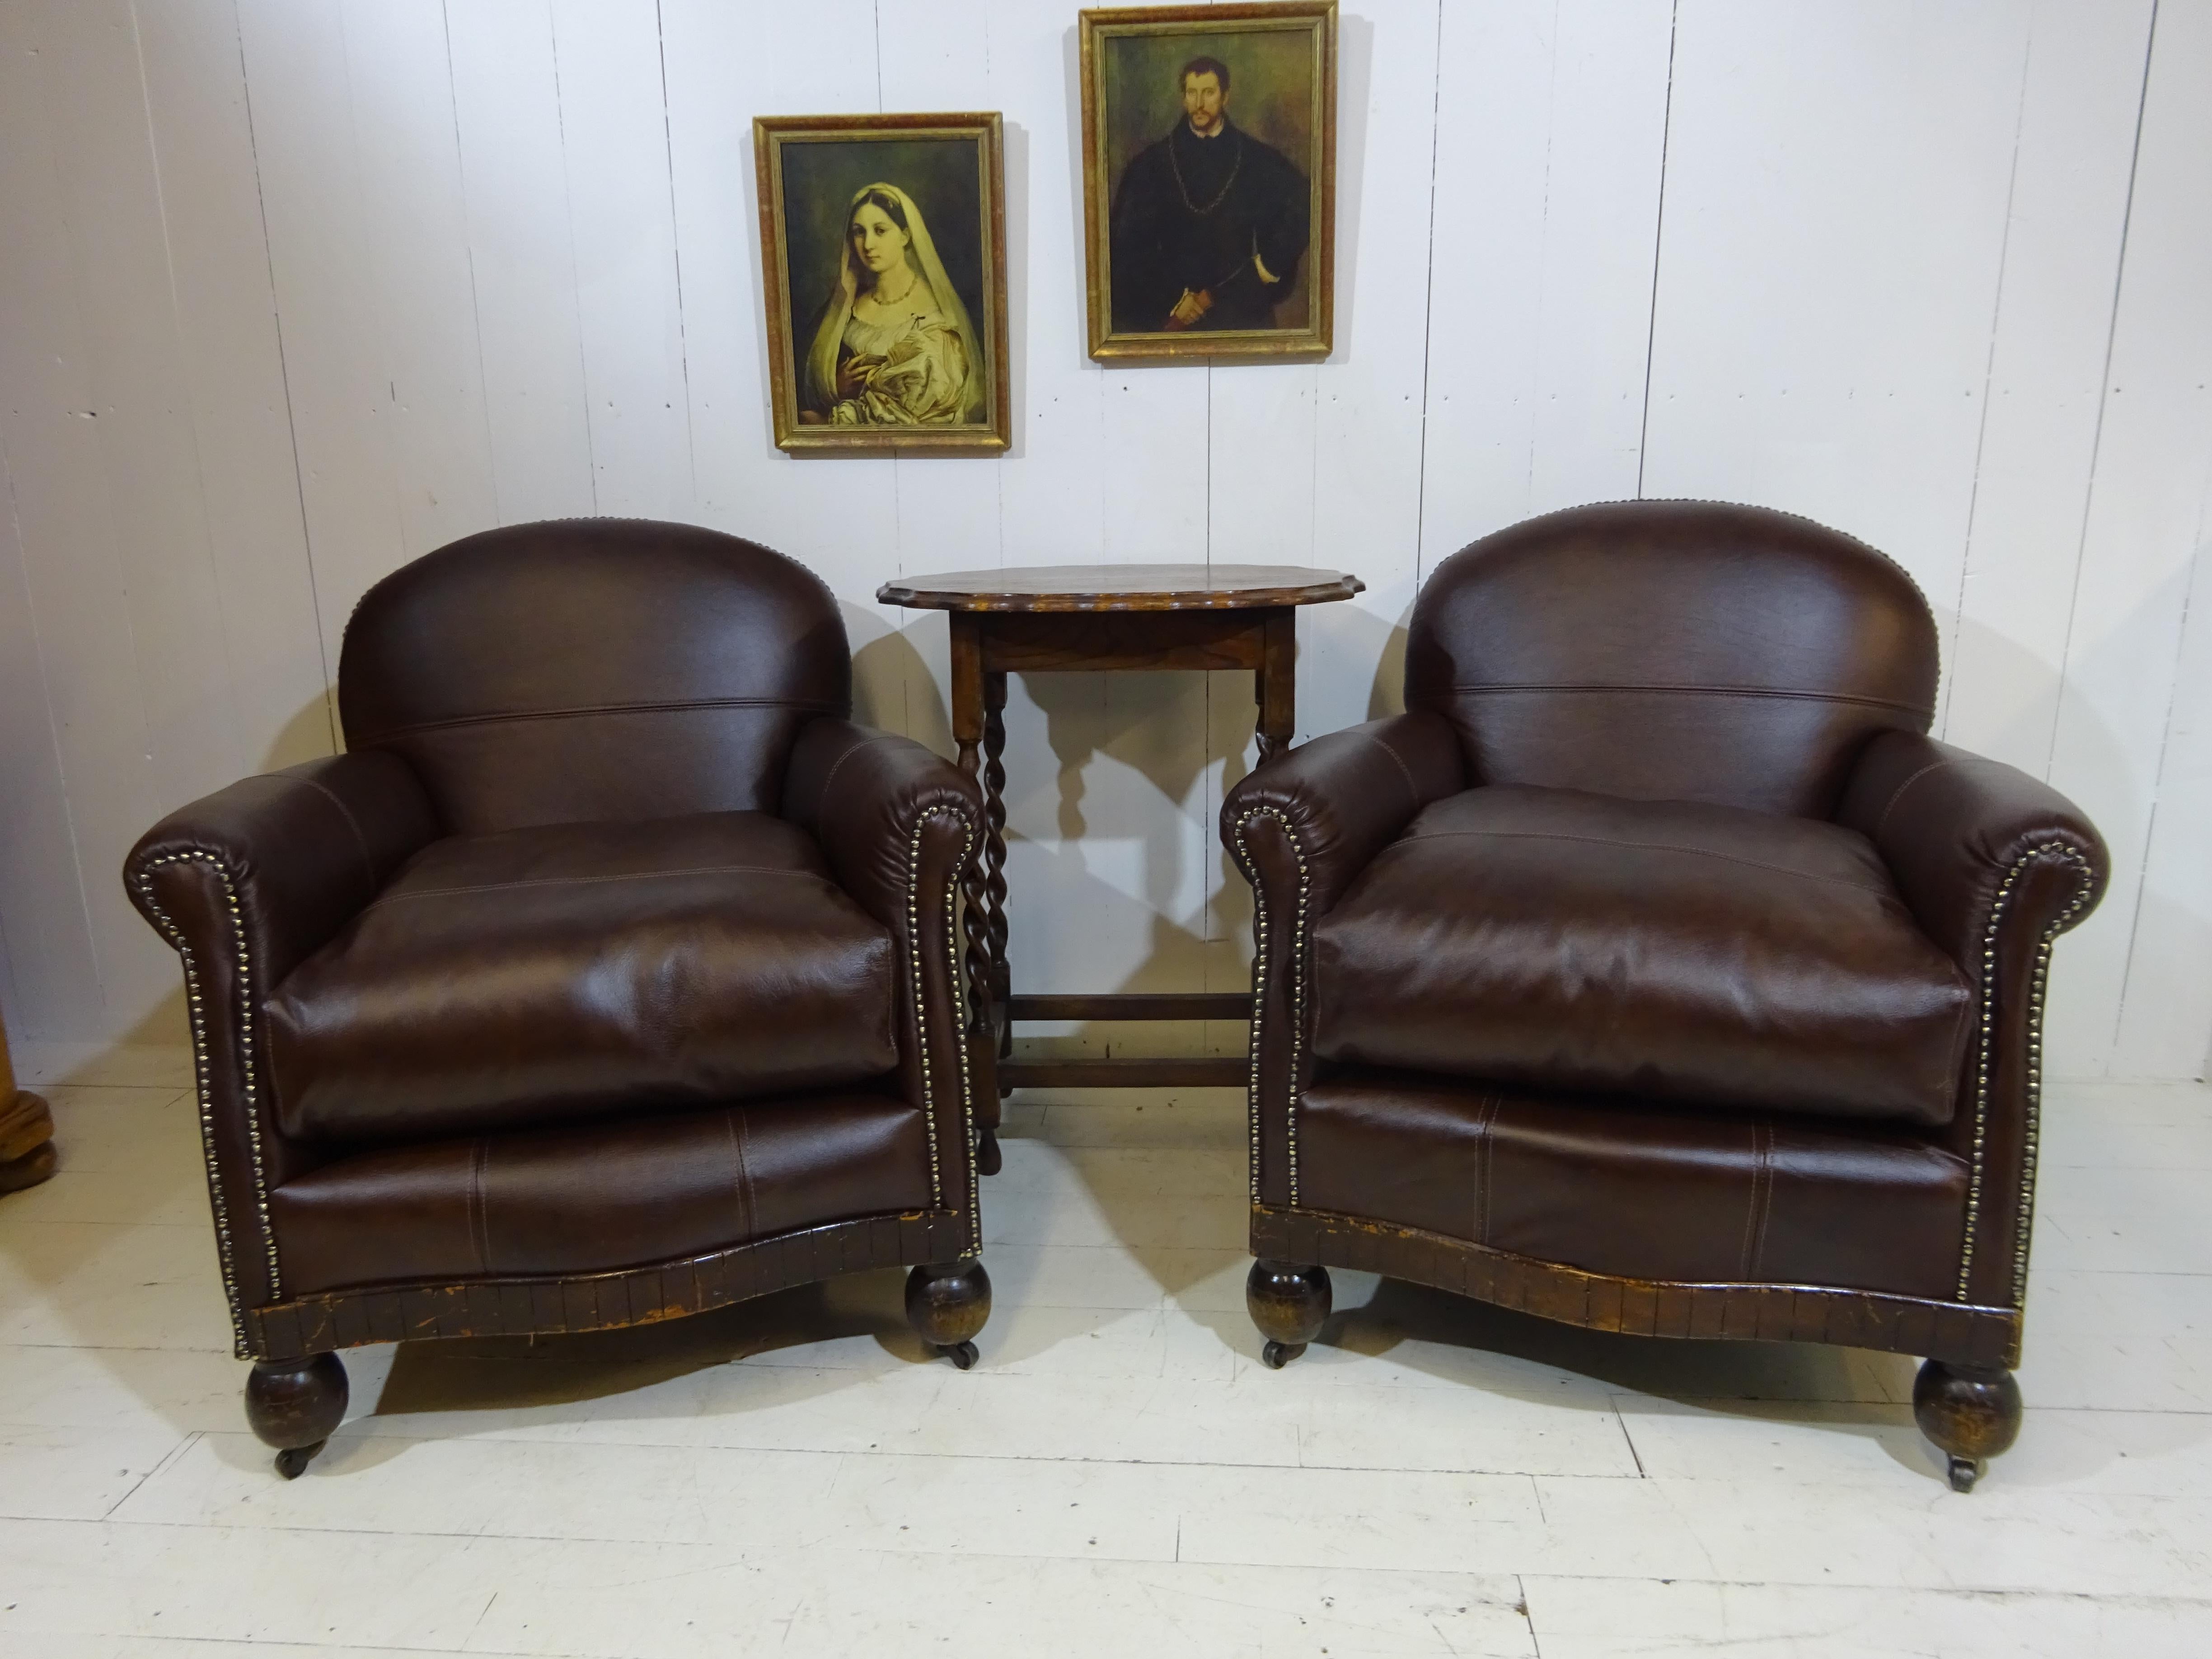 British Limited Edition Art Deco 1920's Club Chair in Antique Brown Leather